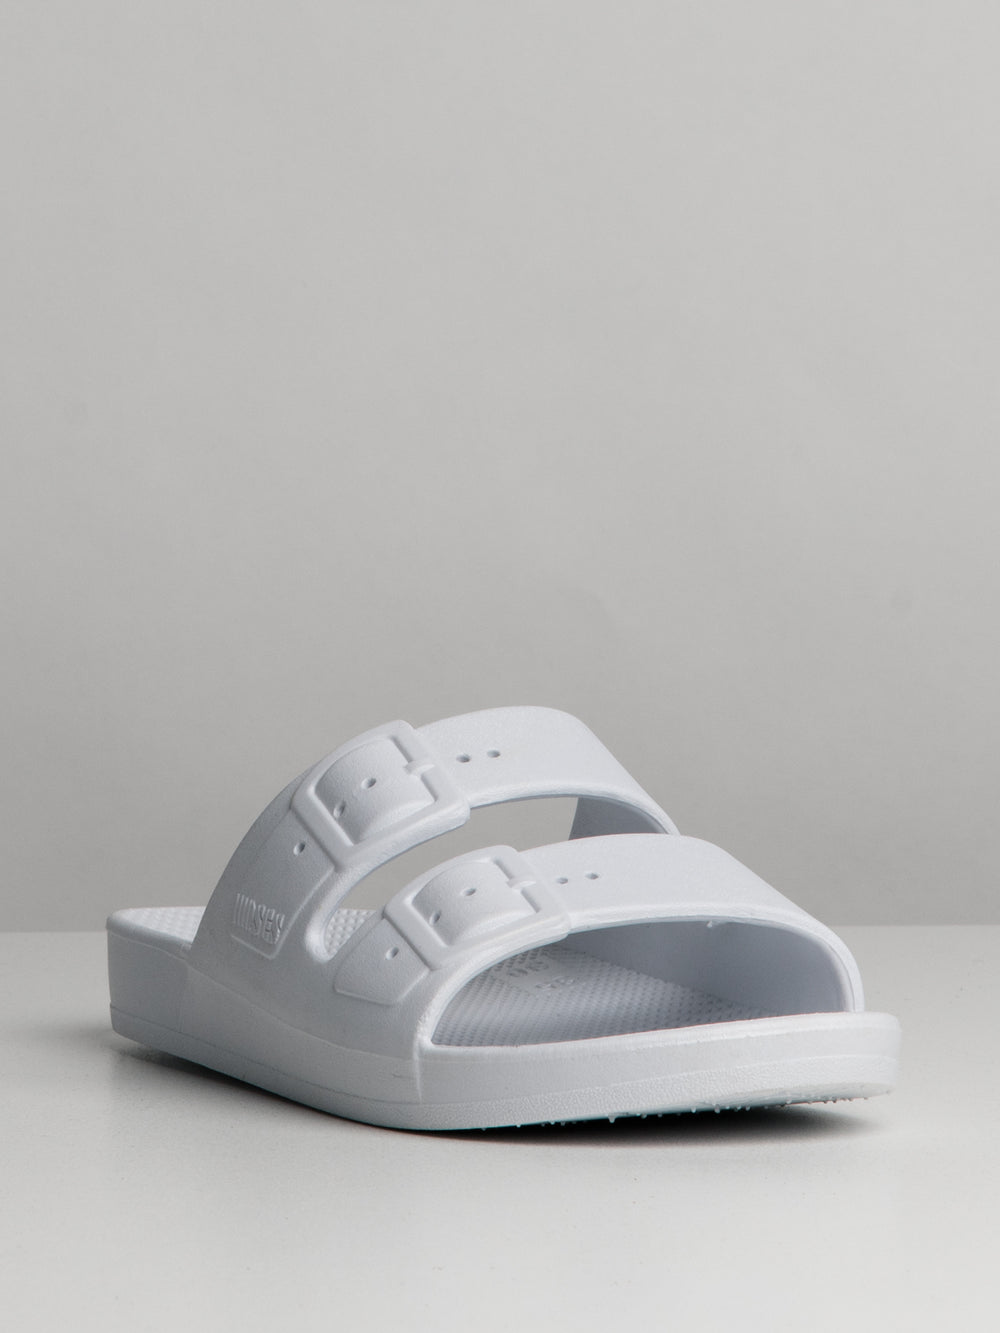 WOMENS FREEDOM MOSES WHITE SANDAL - CLEARANCE